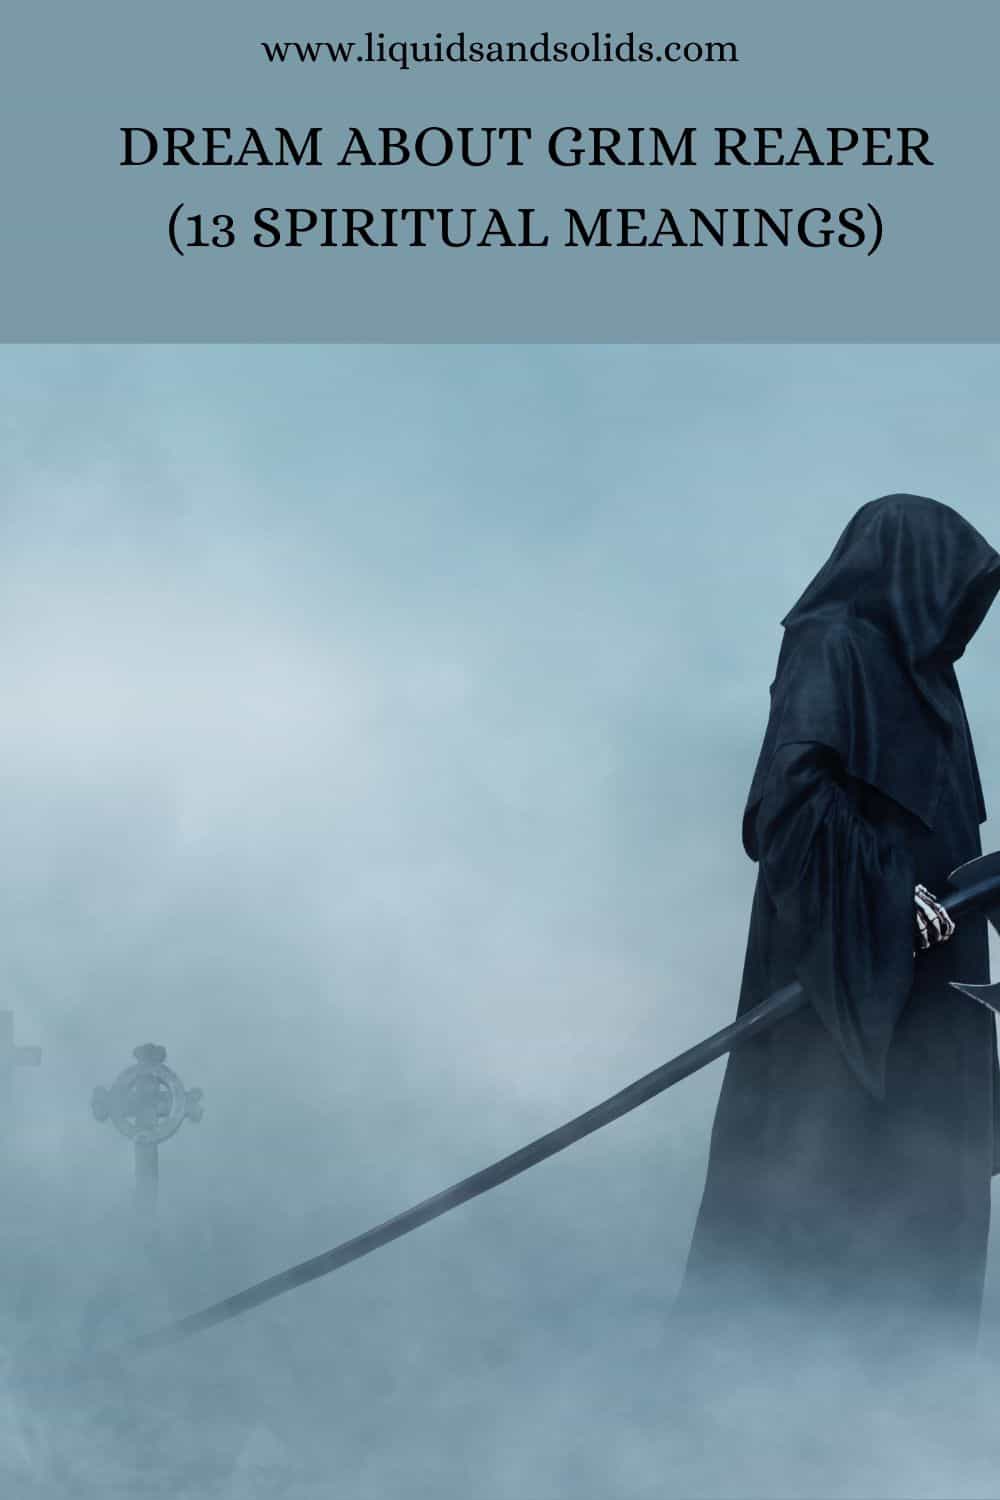 Dream About Grim Reaper (13 Spiritual Meanings)